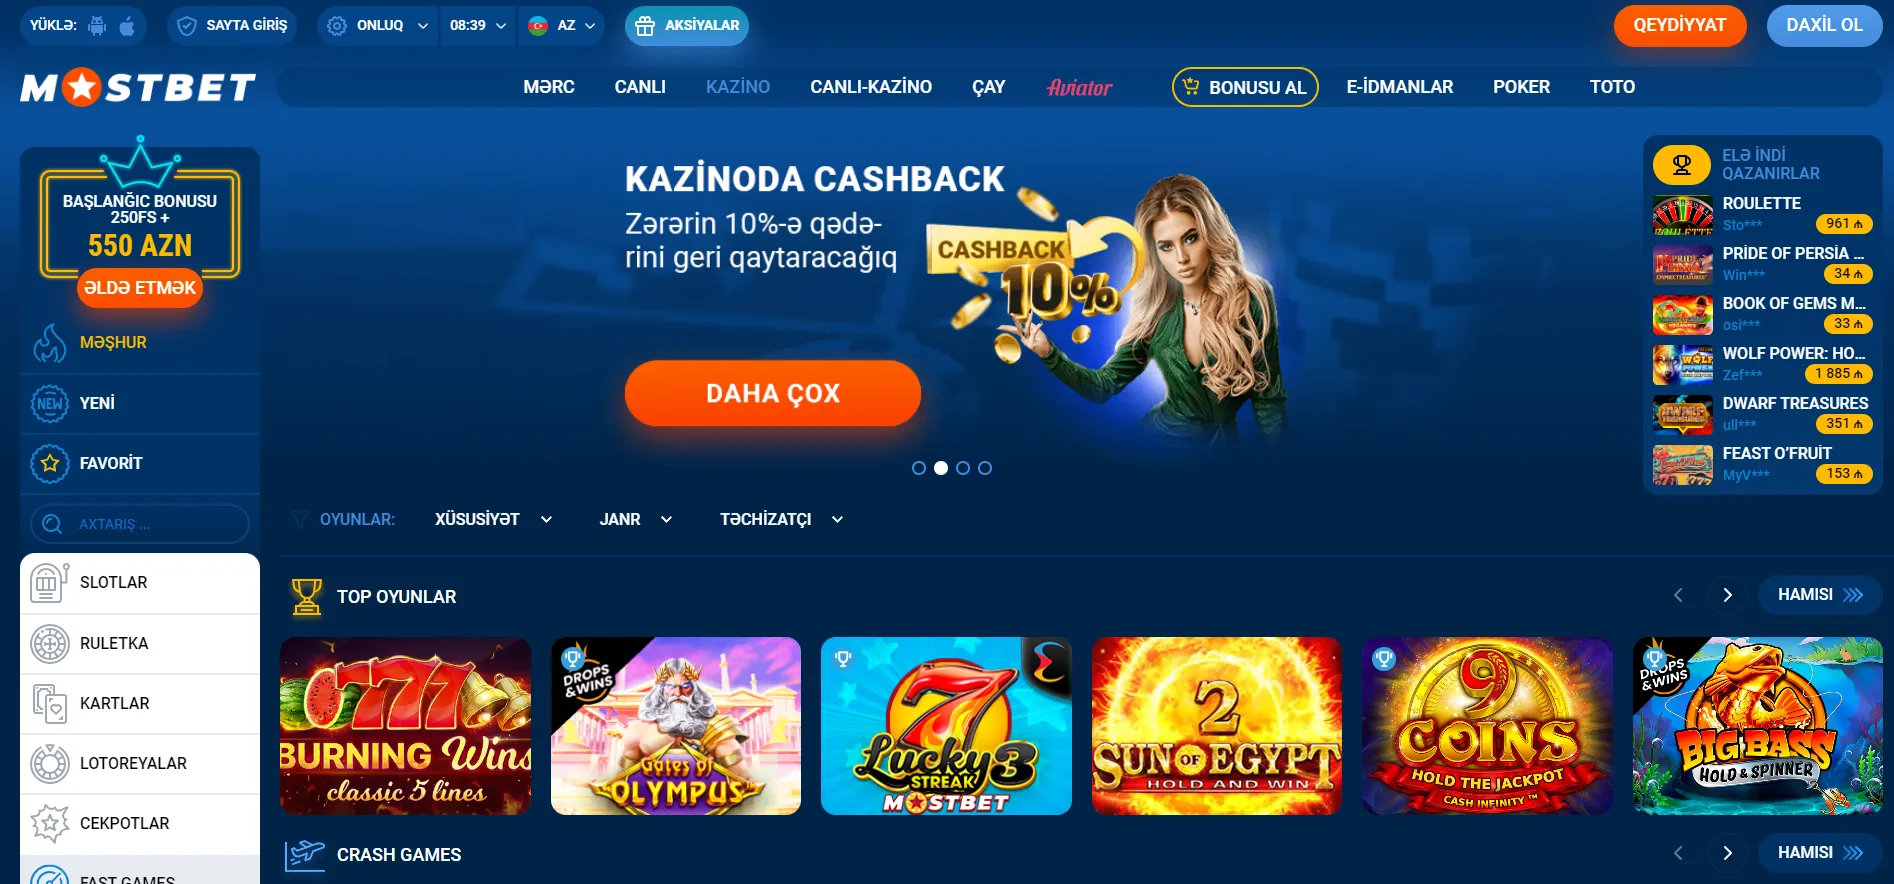 How To Earn $551/Day Using Mostbet UK: Get a signup bonus and more